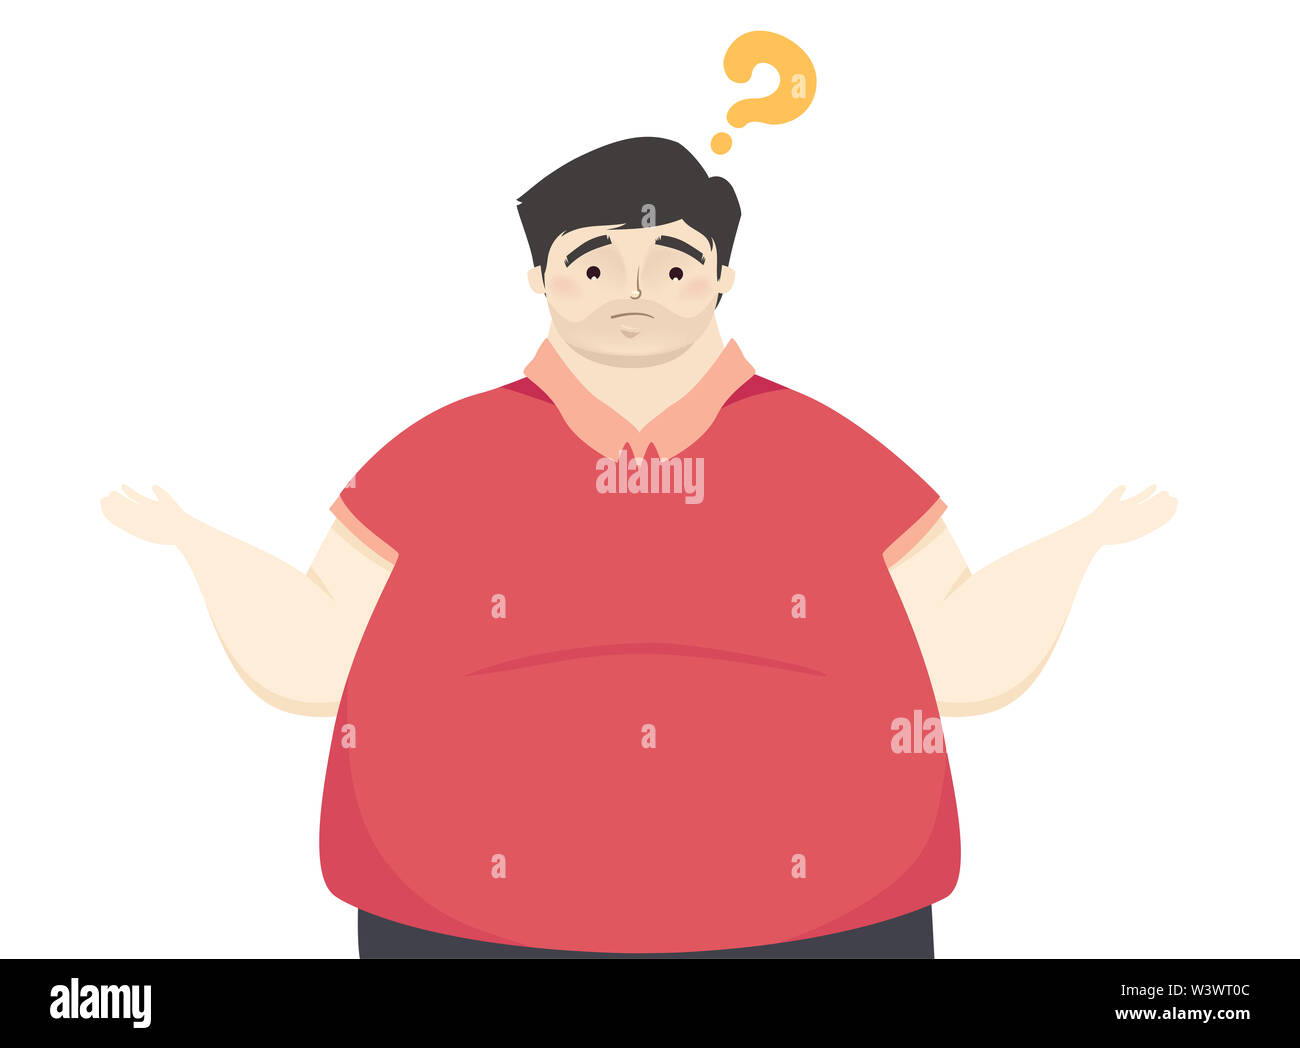 Illustration of a Fat Man with a Big Tummy and a Question Mark on His Head  Stock Photo - Alamy